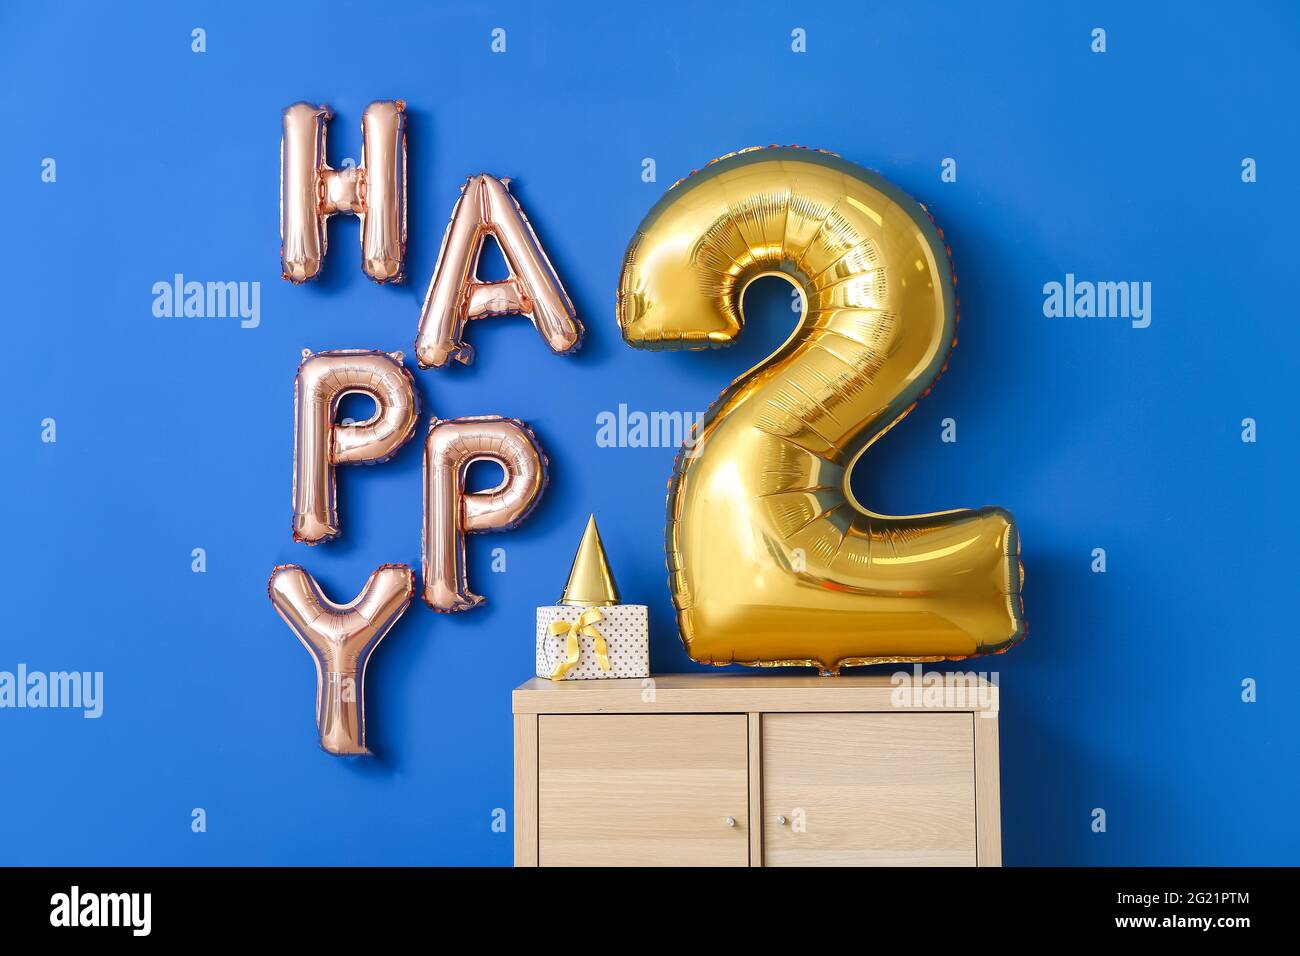 Text HAPPY 2 made of air balloons and chest of drawers near color wall Stock Photo